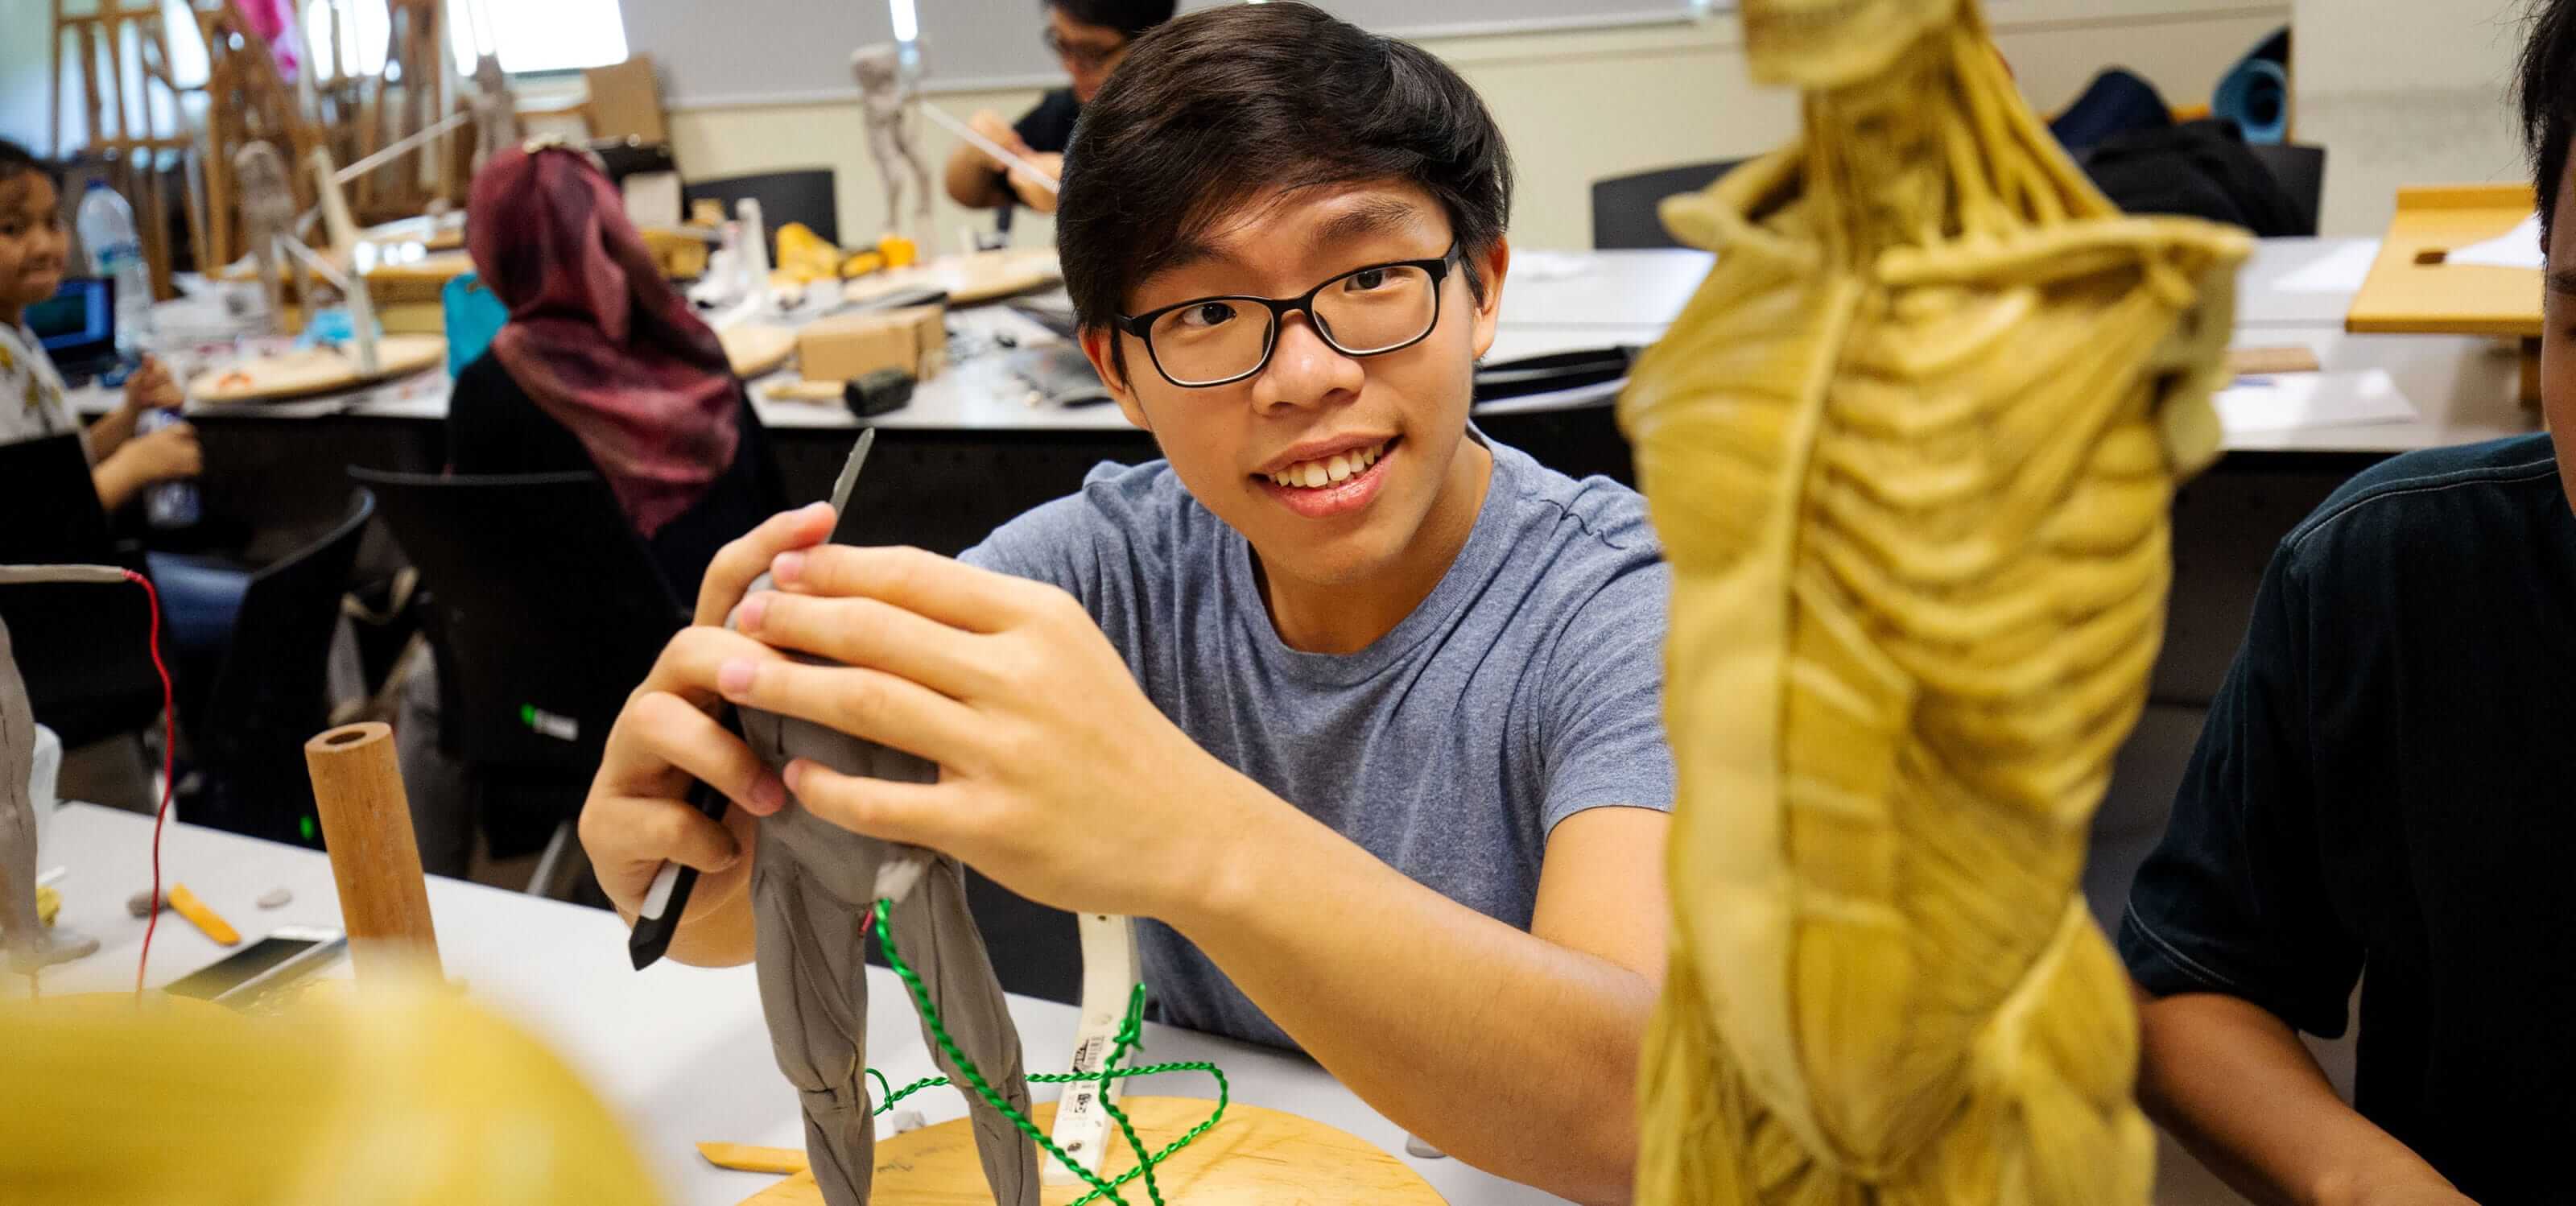 A DigiPen (Singapore) student smiles for the camera as he works on a sculpture of a human figure